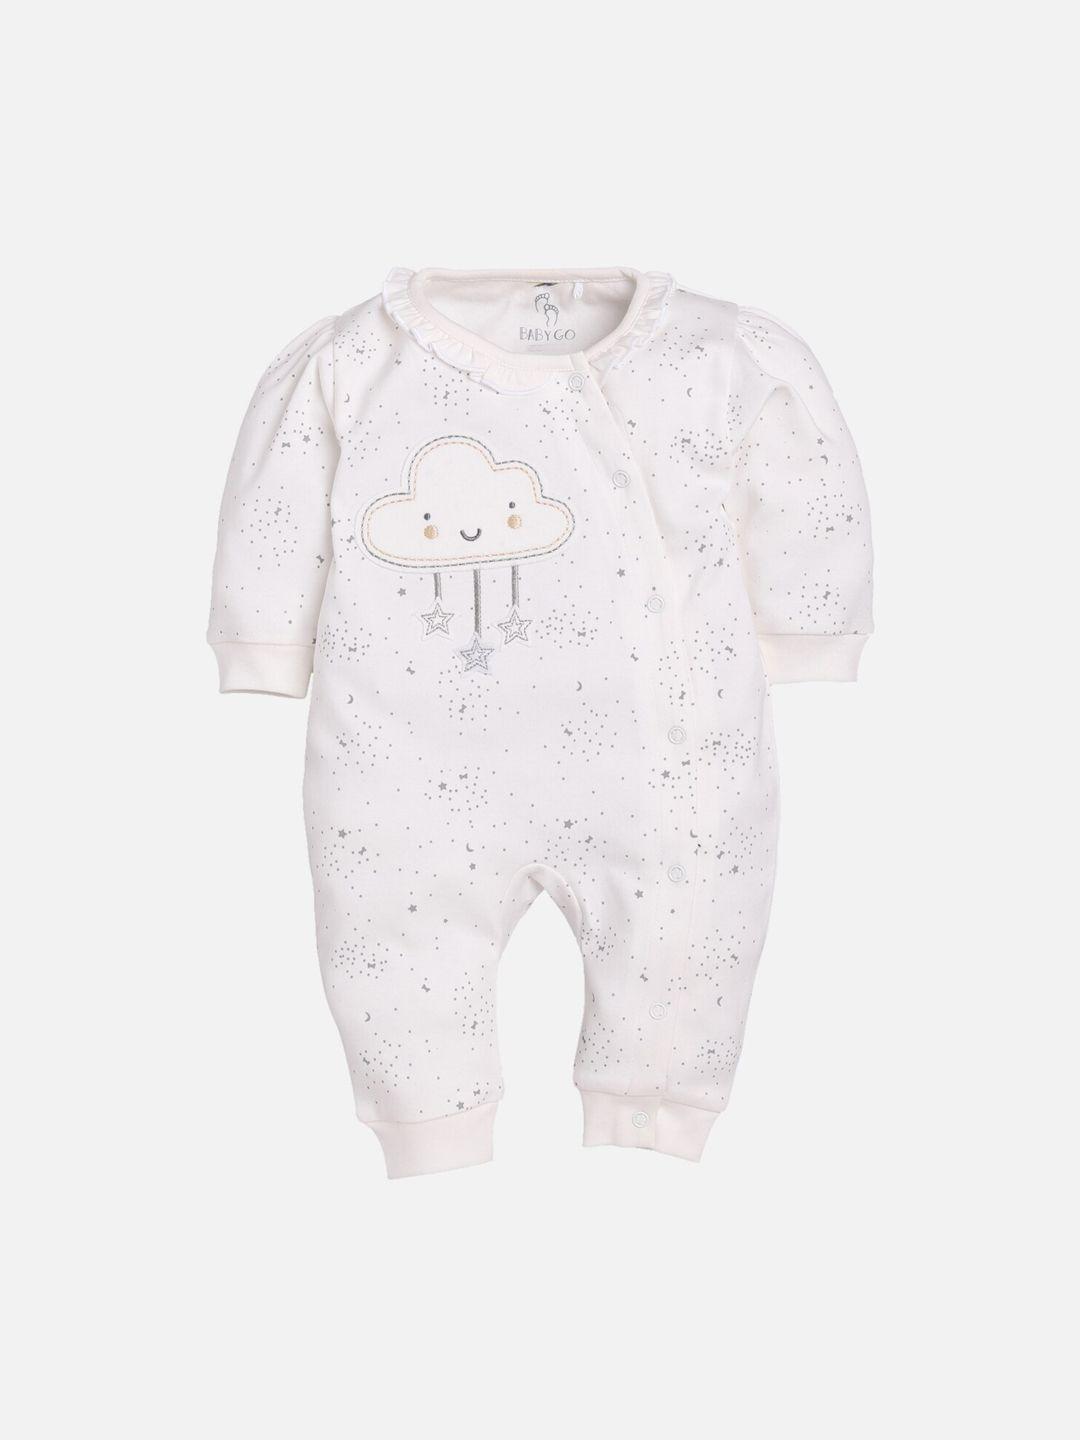 baby-go-infant-kids-white-&-grey-printed-rompers